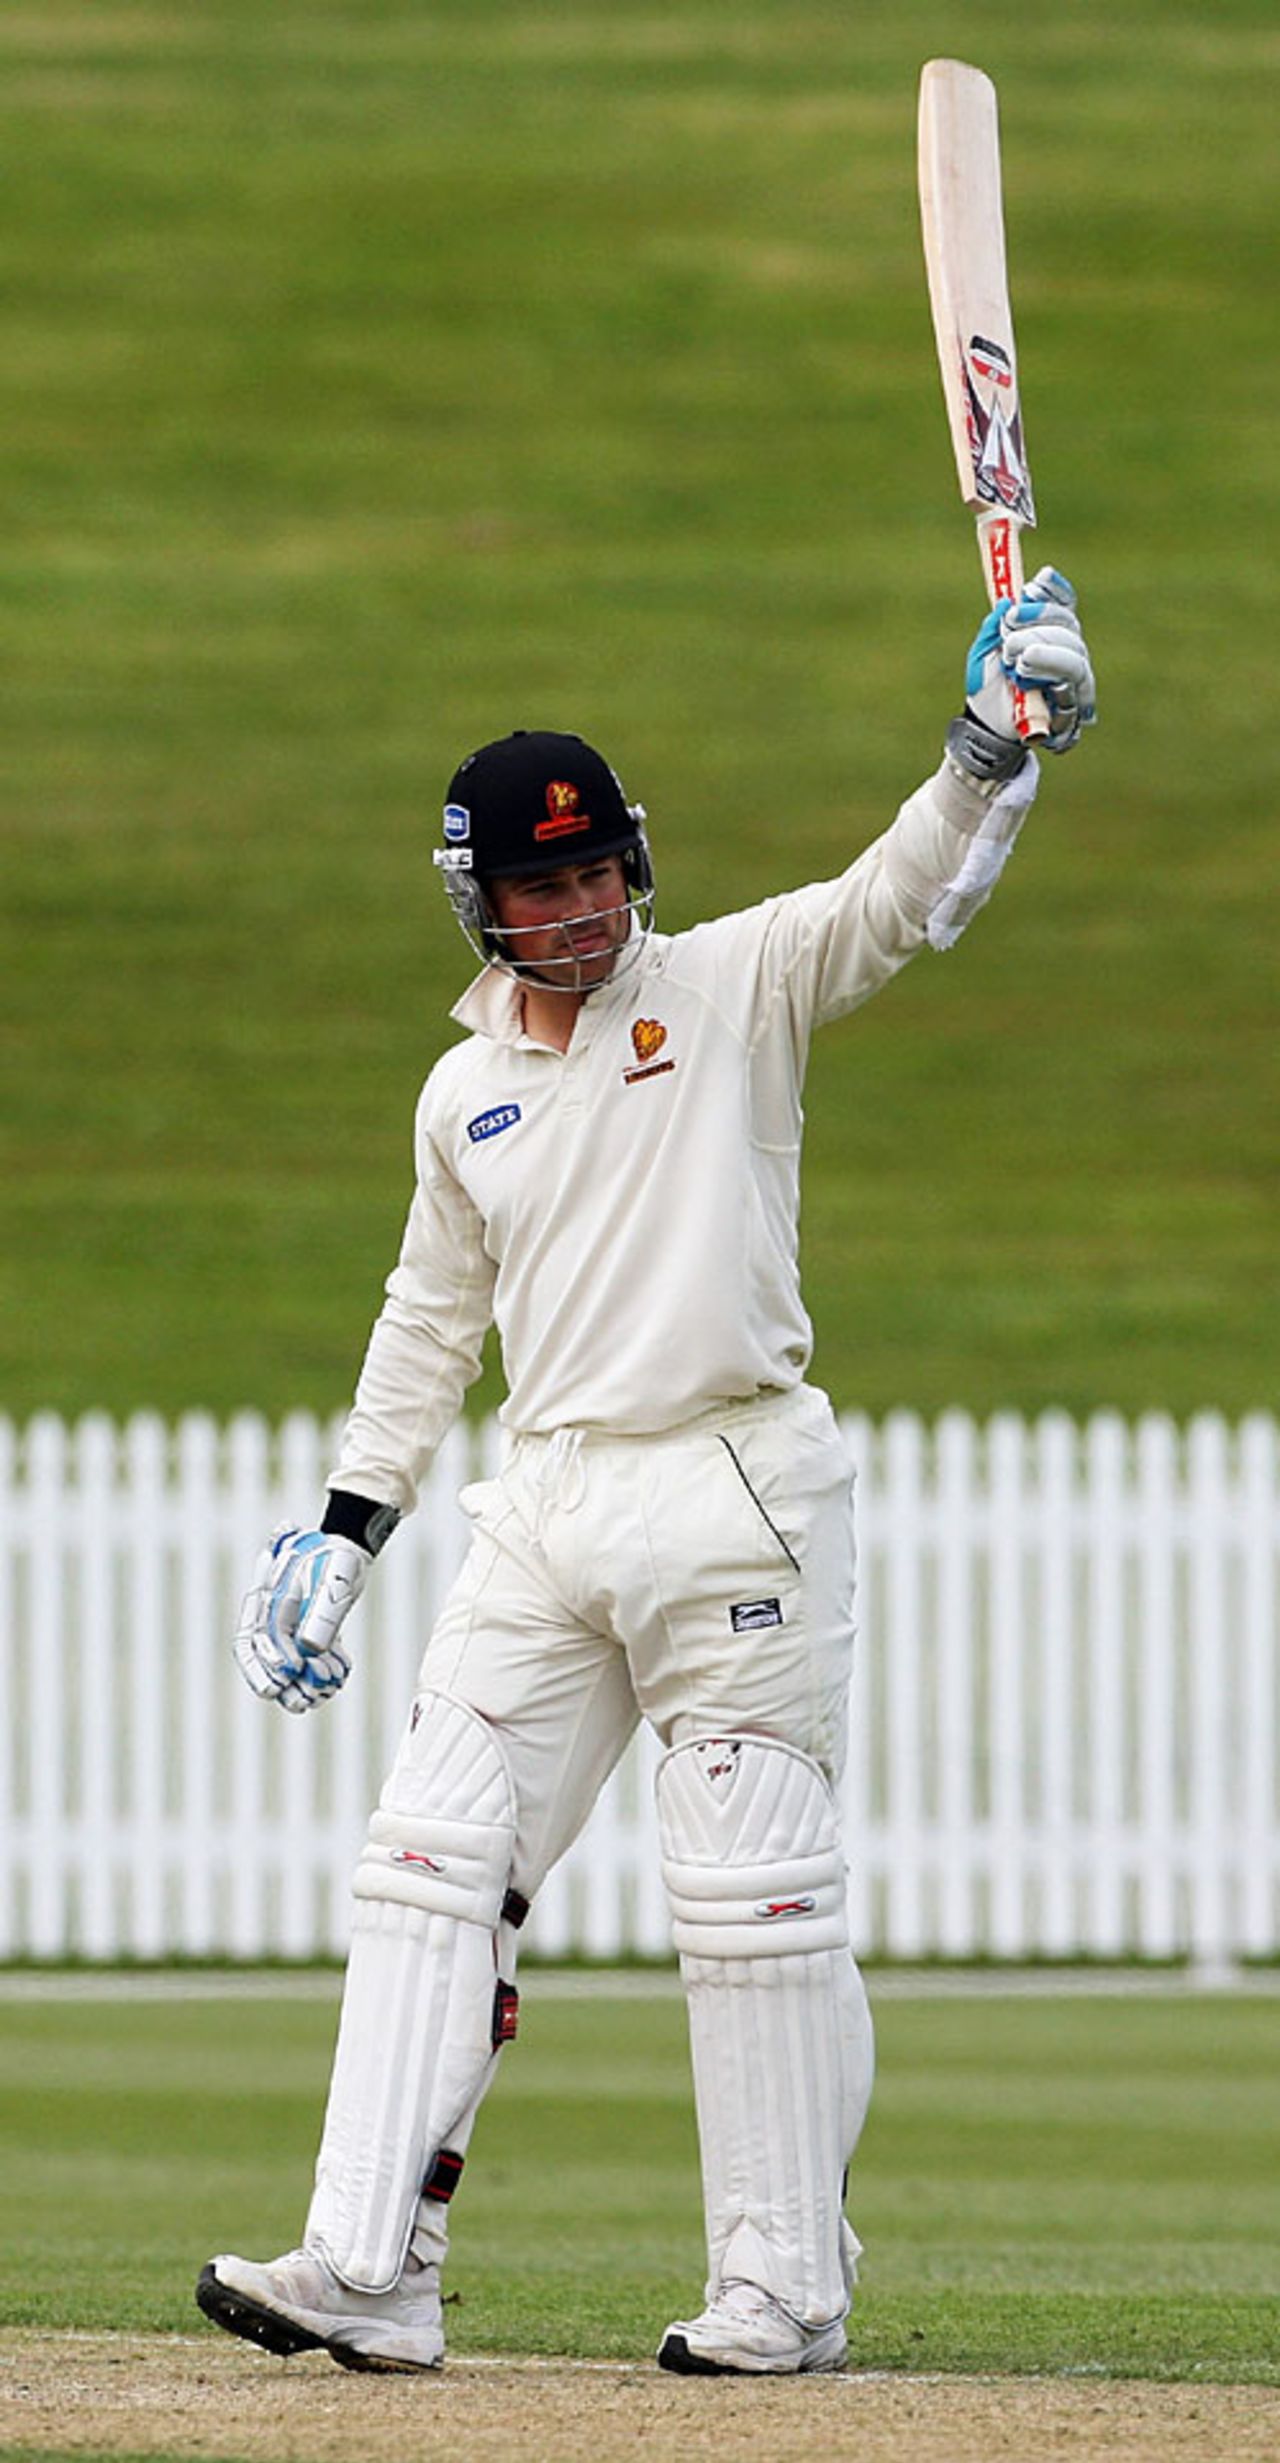 Matthew Bell raises the bat after reaching his half-century for Wellington, Northern Districts v Wellington, State Championship, 2nd day, Hamilton, November 13, 2007